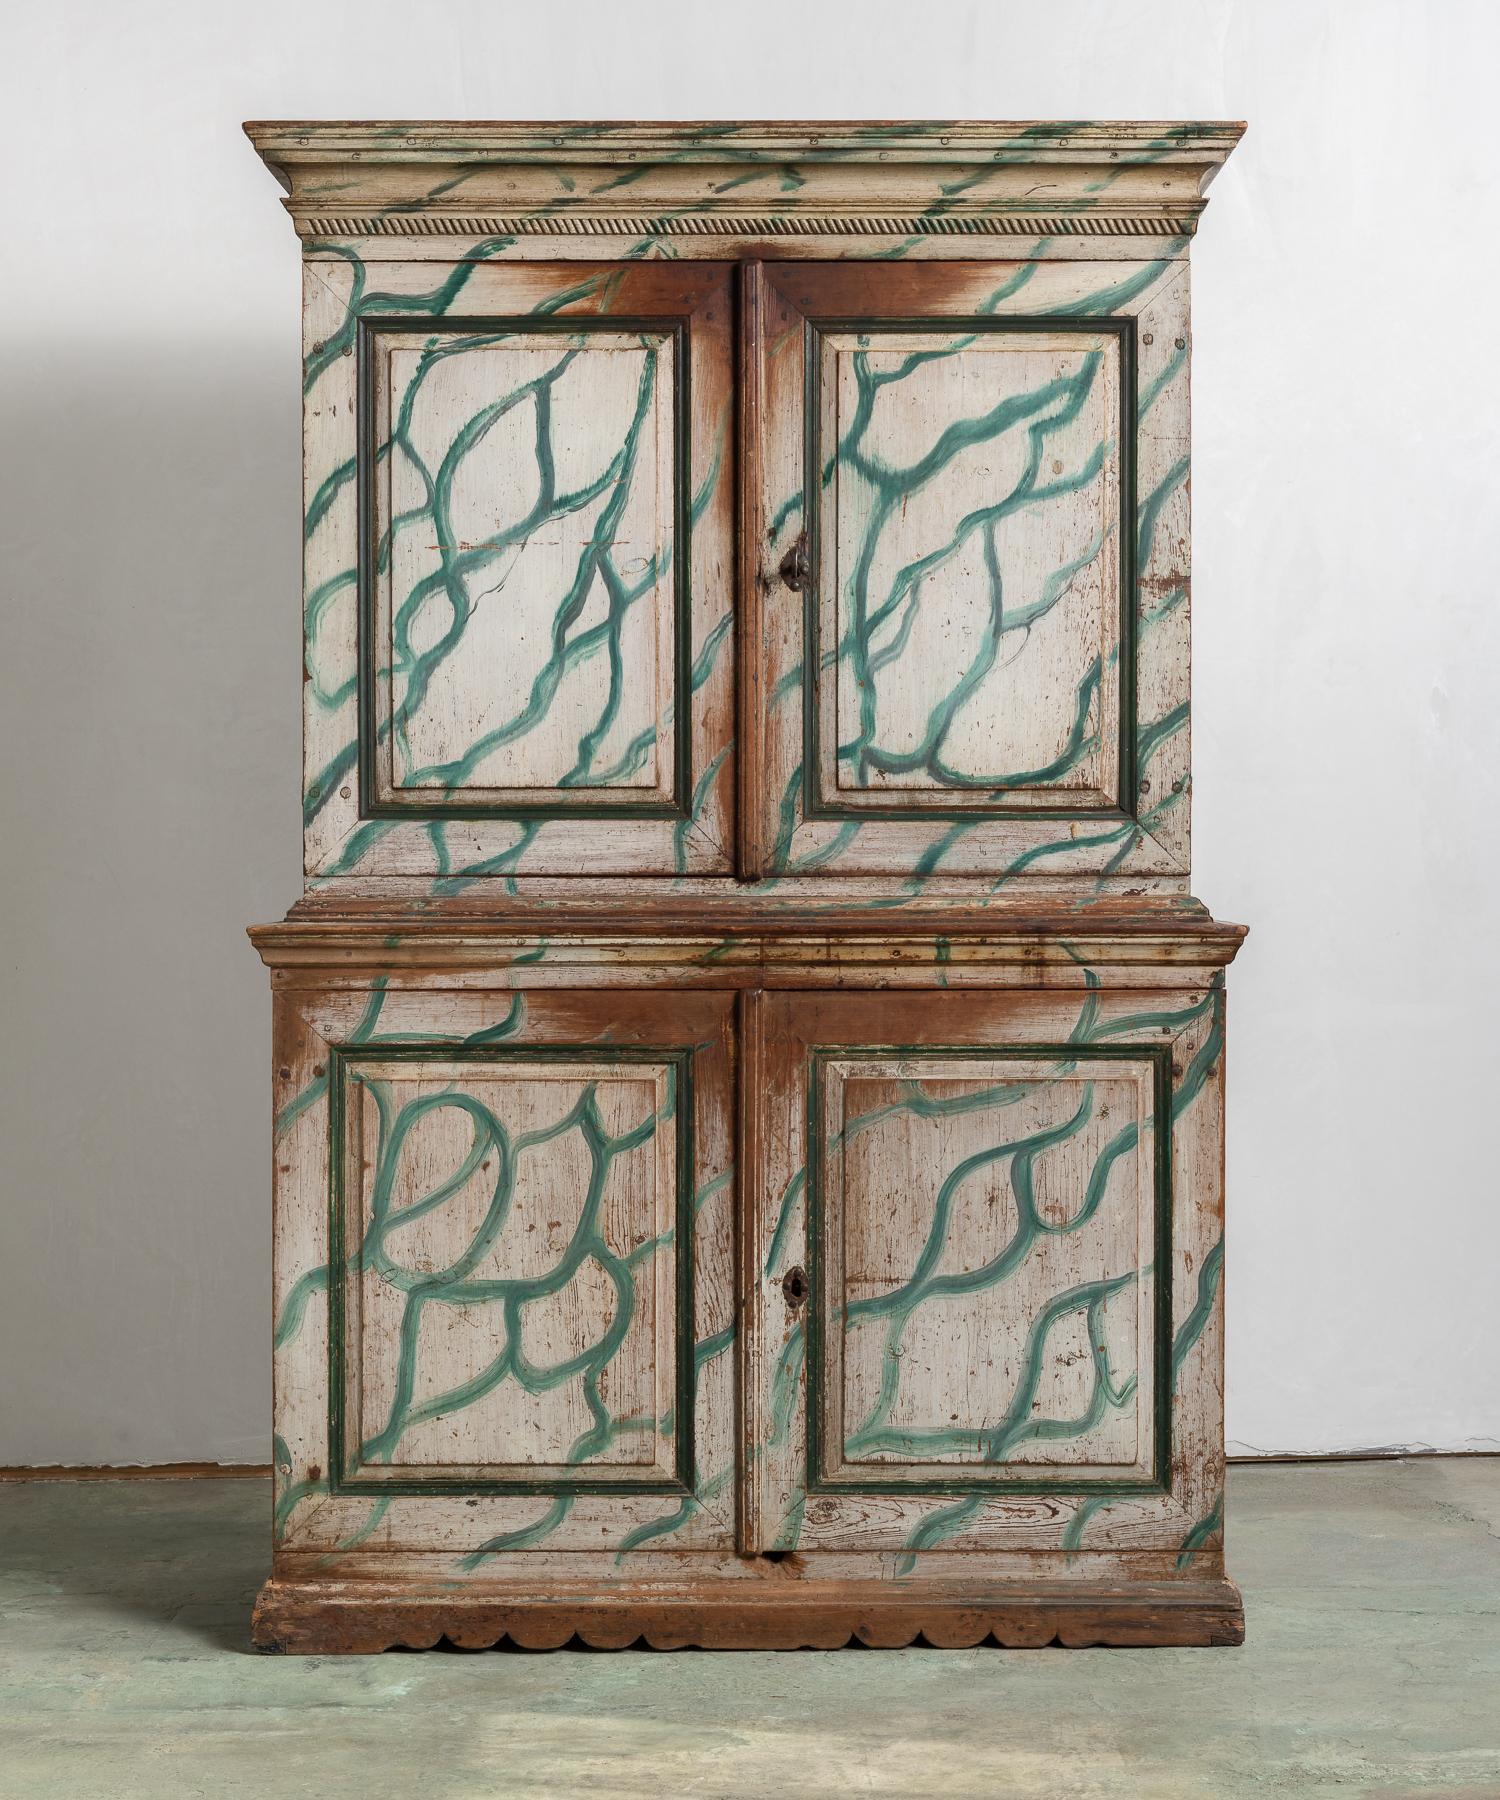 Painted wooden cupboard, Sweden, circa 1800

Early 19th century extraordinary Swedish cupboard with boldly grained painted surface. Original condition.